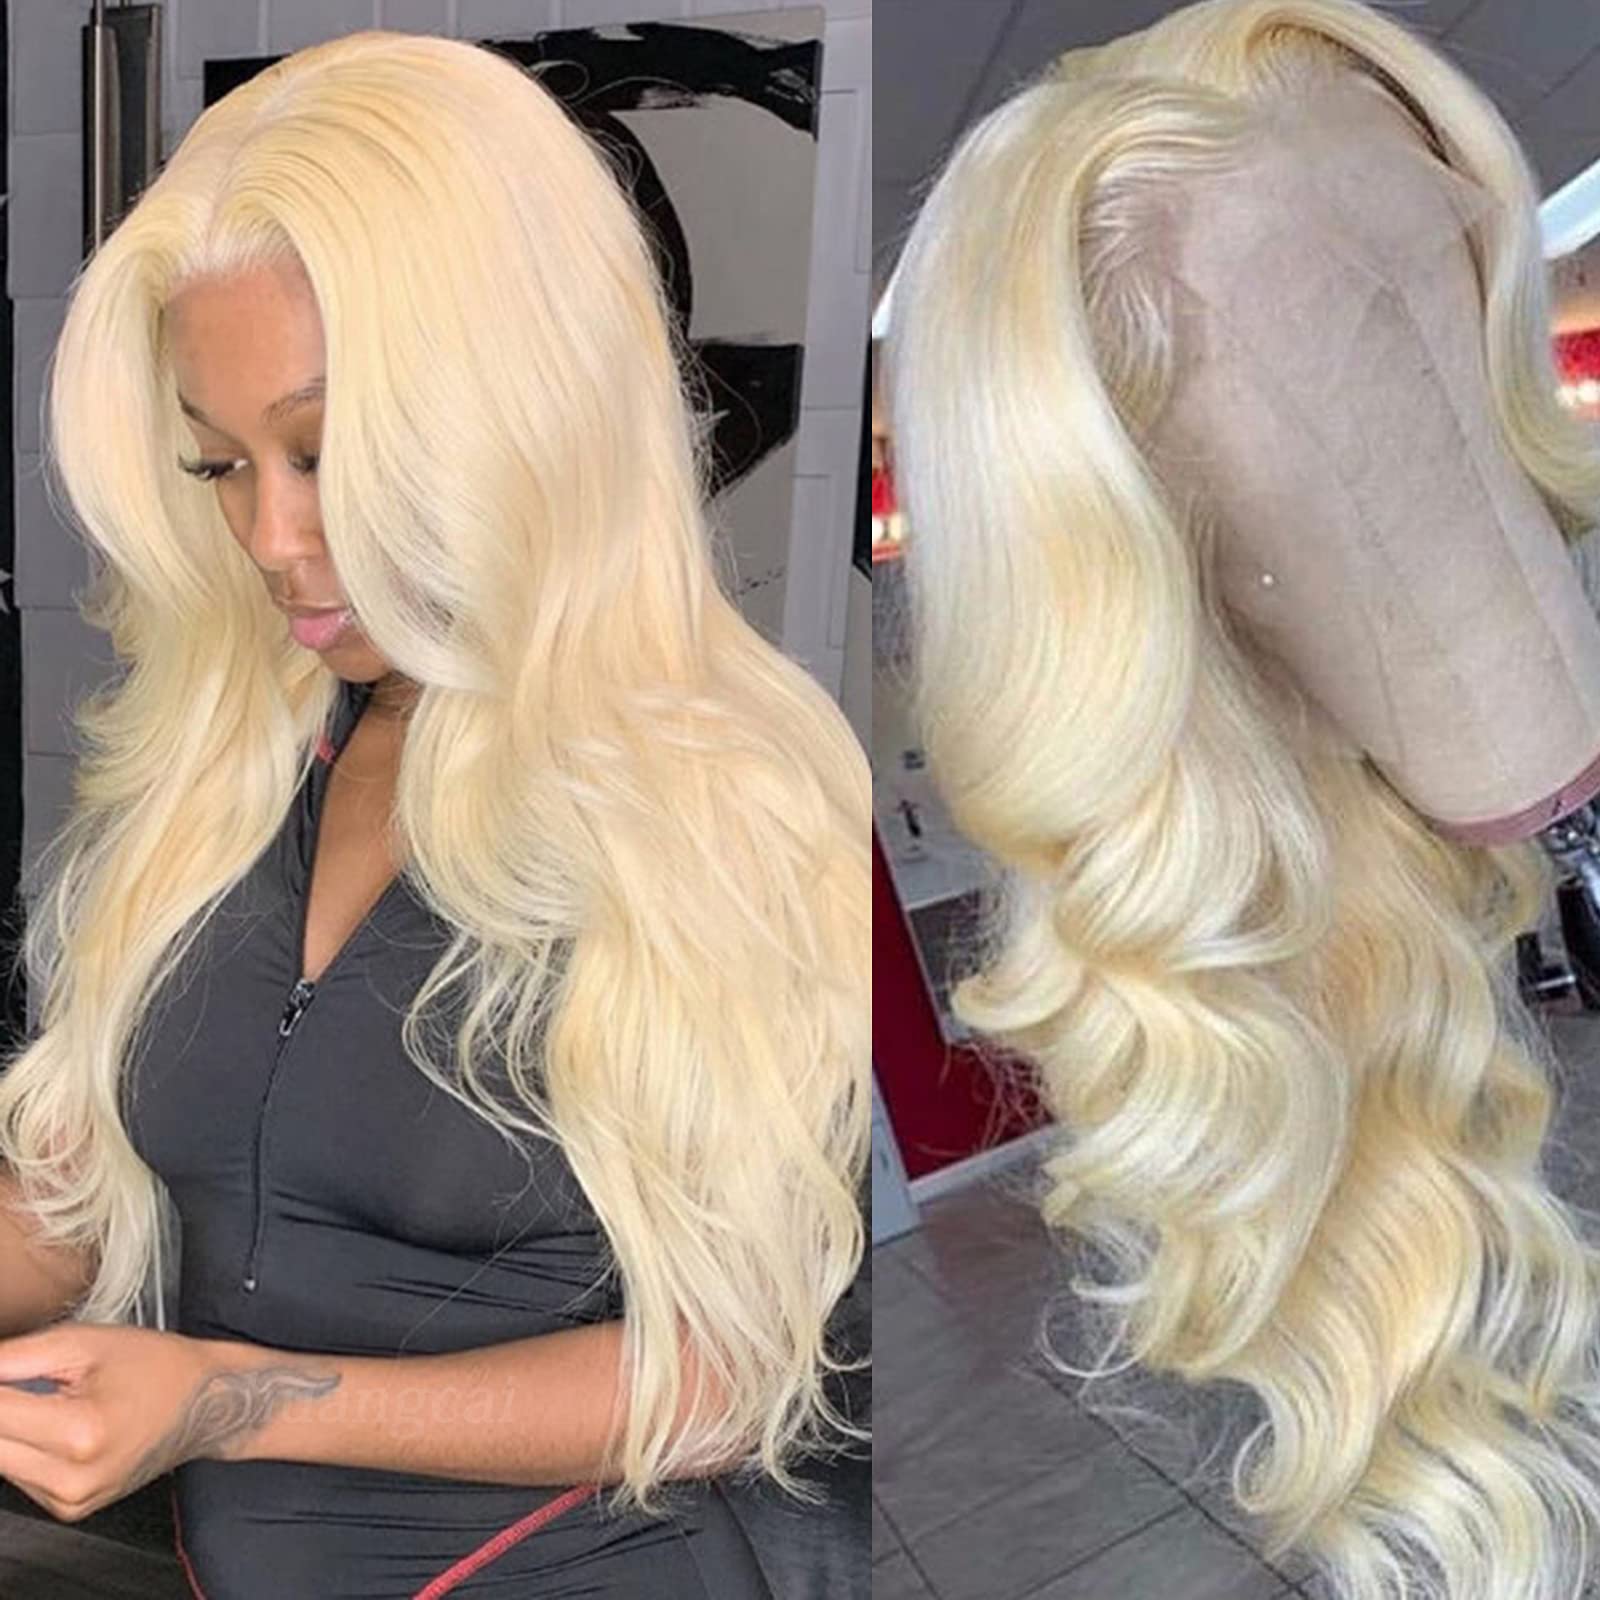 Brazilian Body Wave Wigs Lace Front Human Hair Wigs for Black